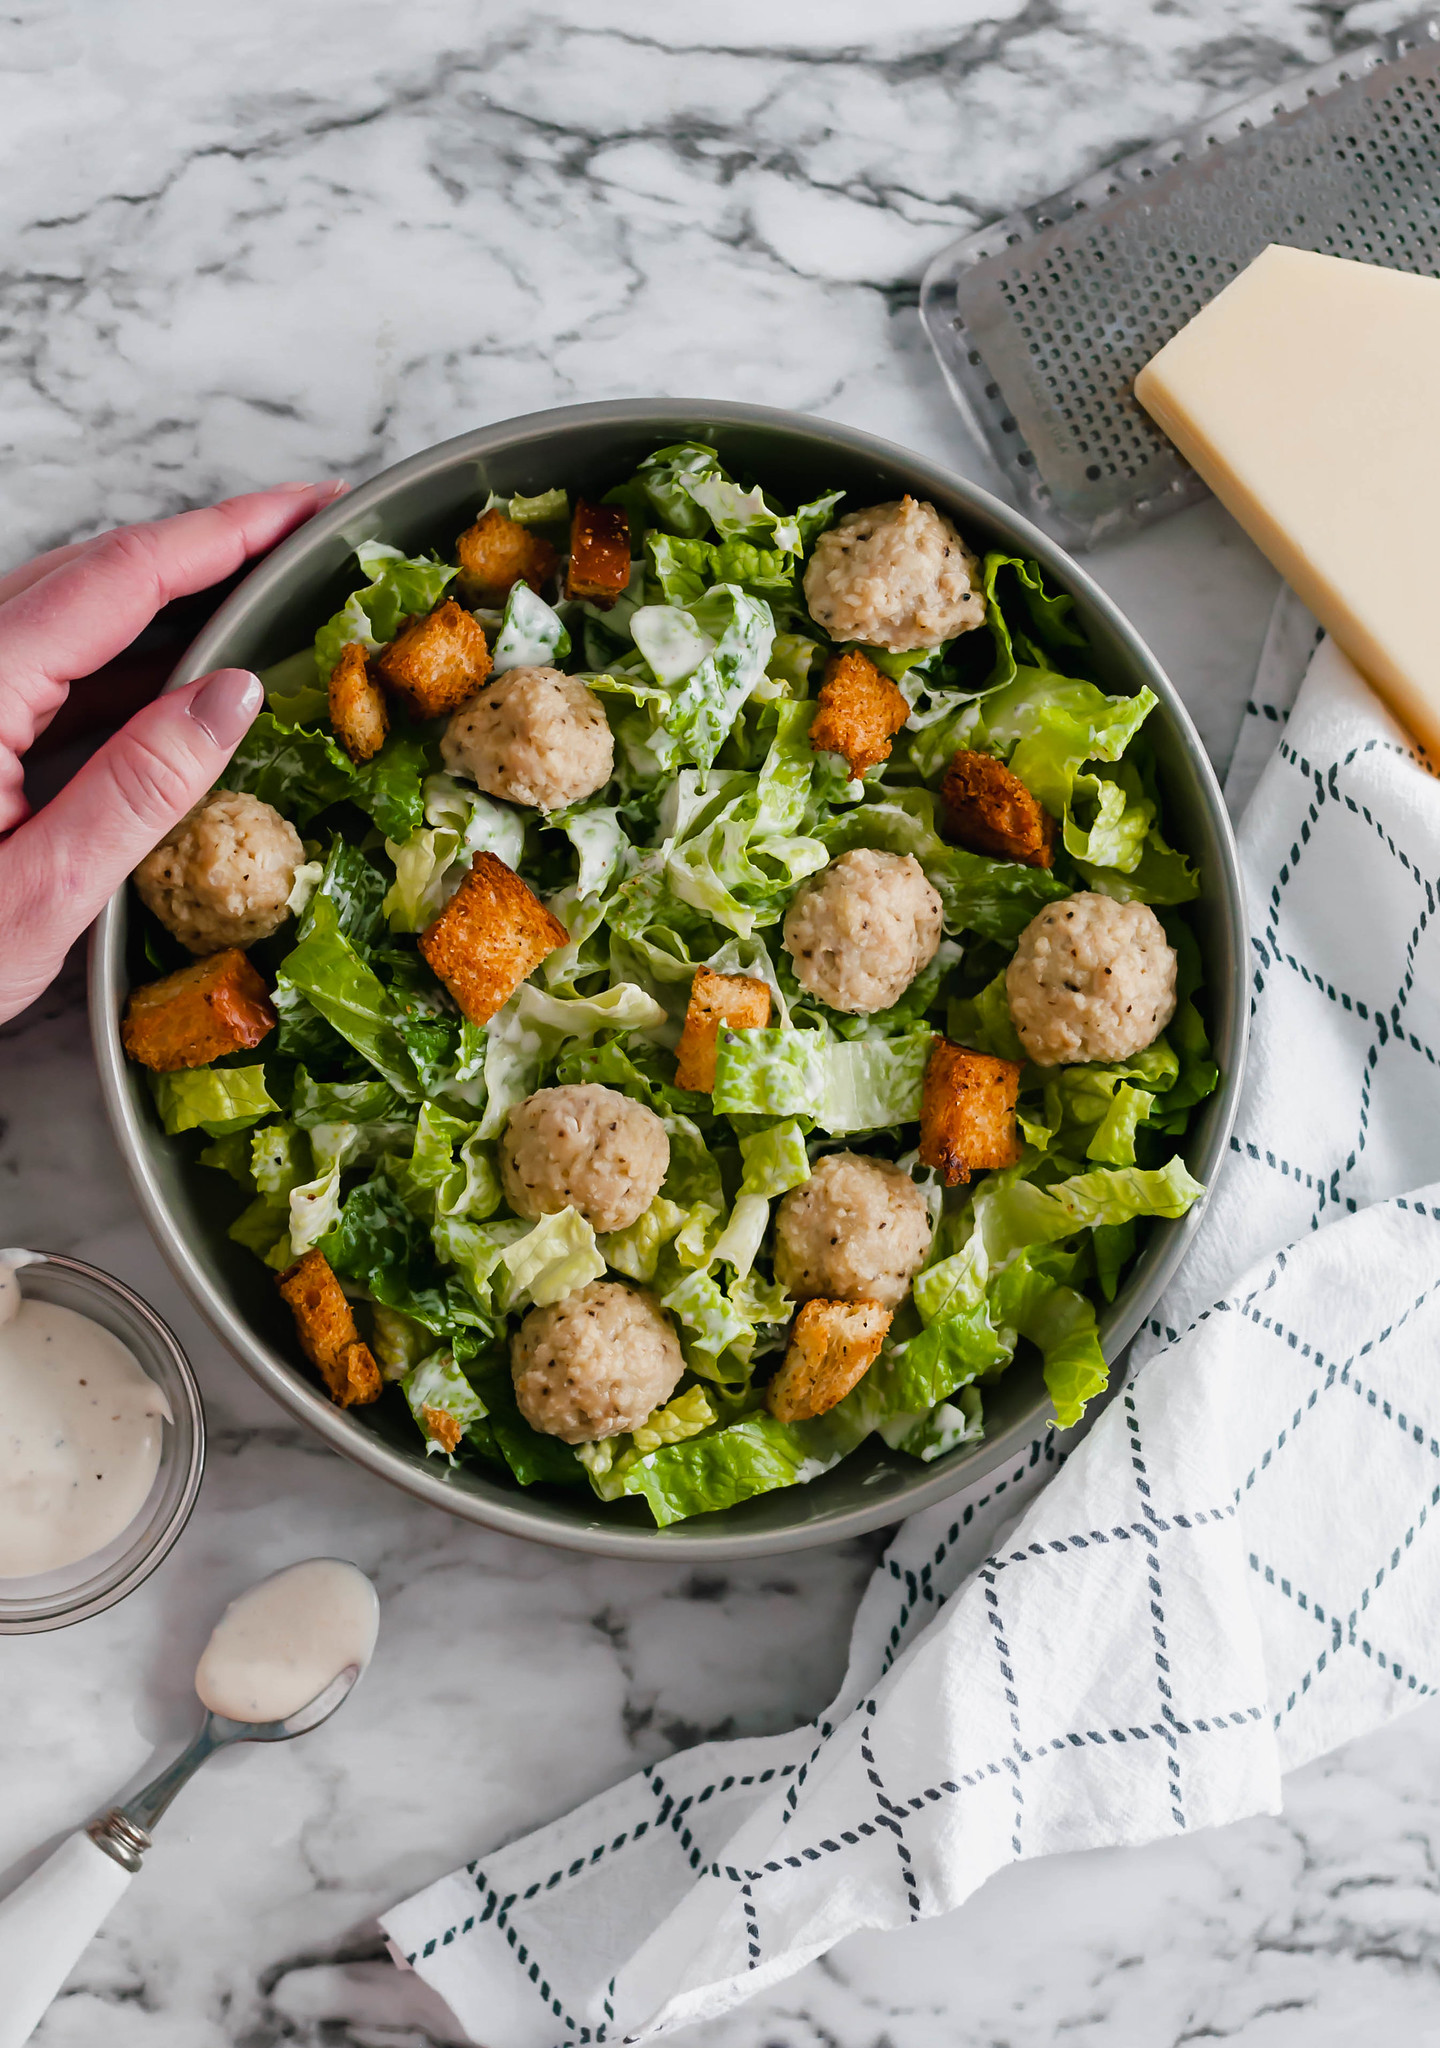 Salad Meal Prep is the perfect way to start out your New Year healthy. 45 minutes of prep results in a weeks worth of healthy and delicious lunches. Caesar dressing, homemade croutons and mini chicken meatballs add lots of flavor to the mix.